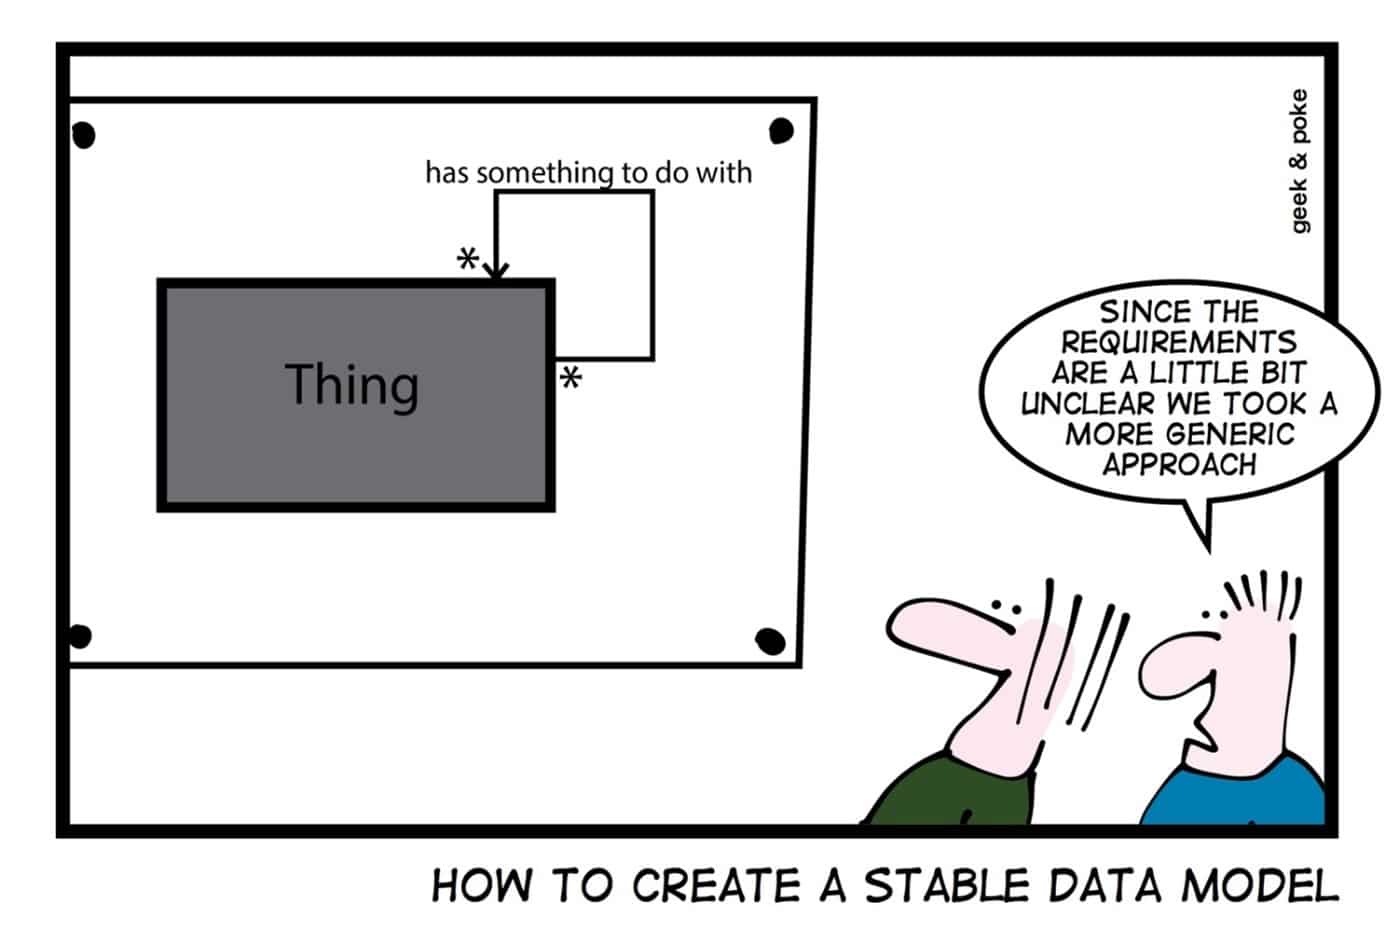 How to create a stable data model